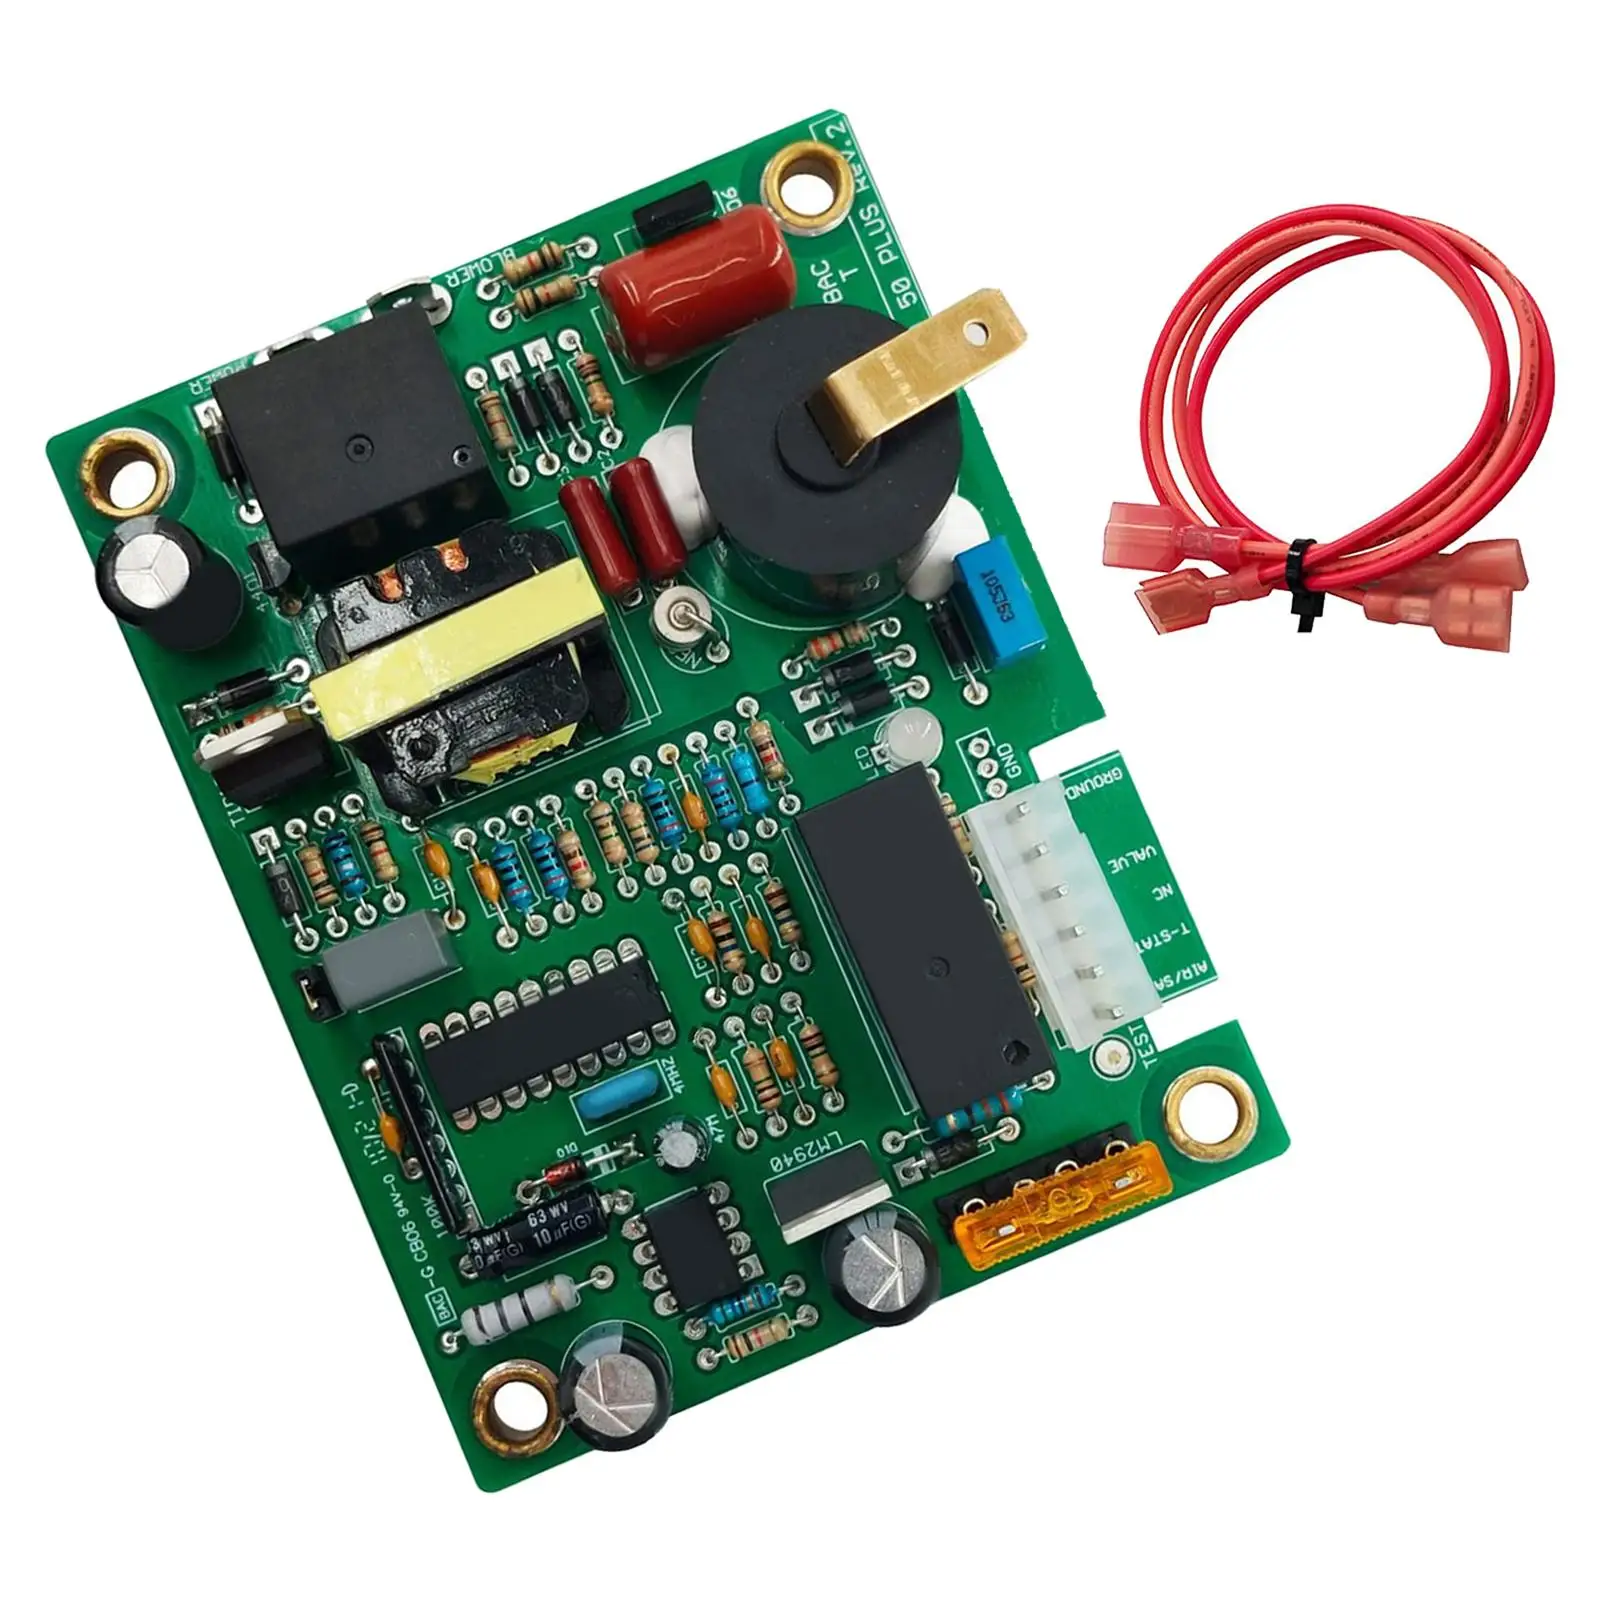 Ignitor Circuit Board Quality Accessory High Performance Professional Ignition Controls Board for Upgrade Older Furnaces